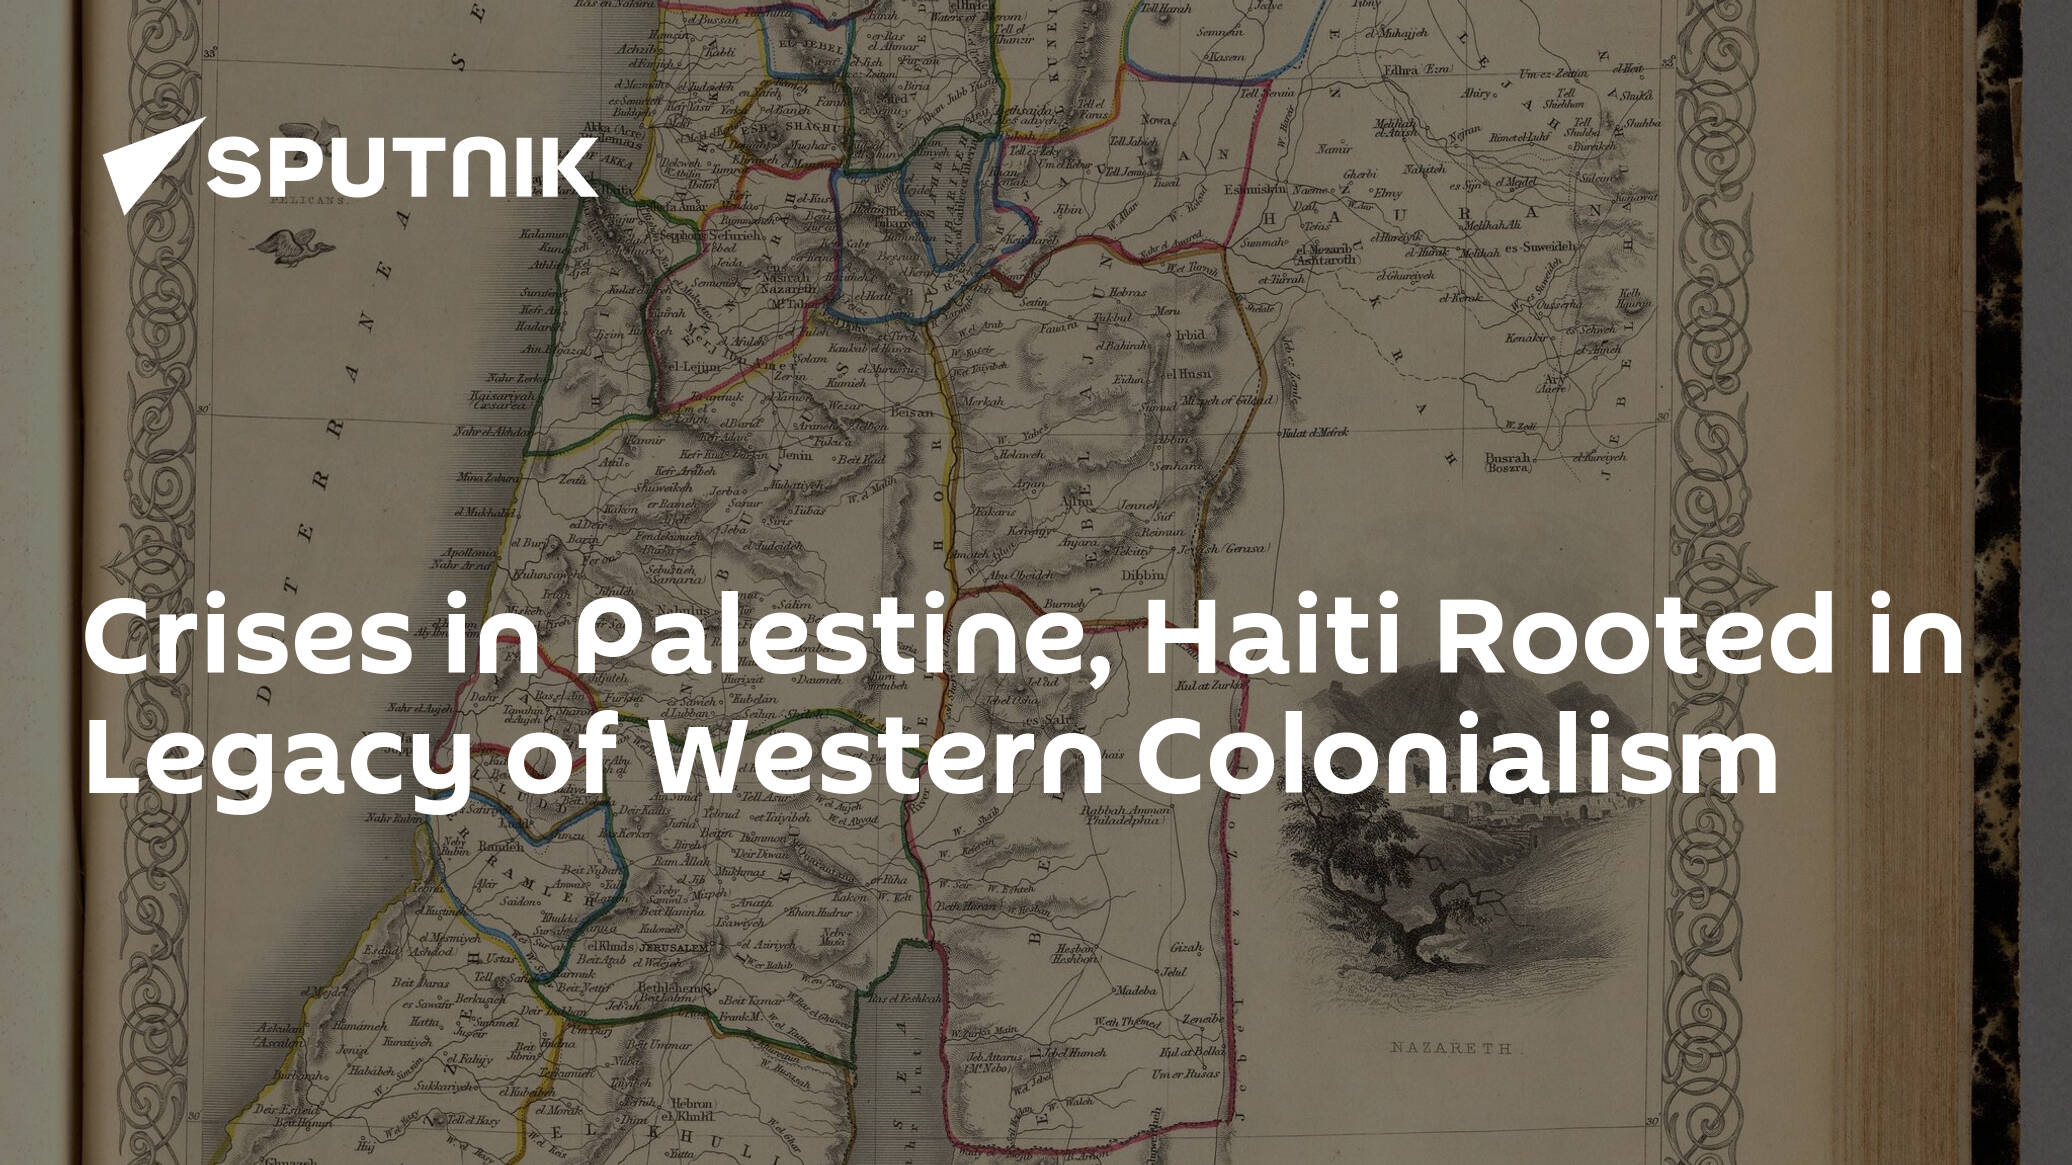 Crises in Palestine Haiti Rooted in Legacy of Western Colonialism